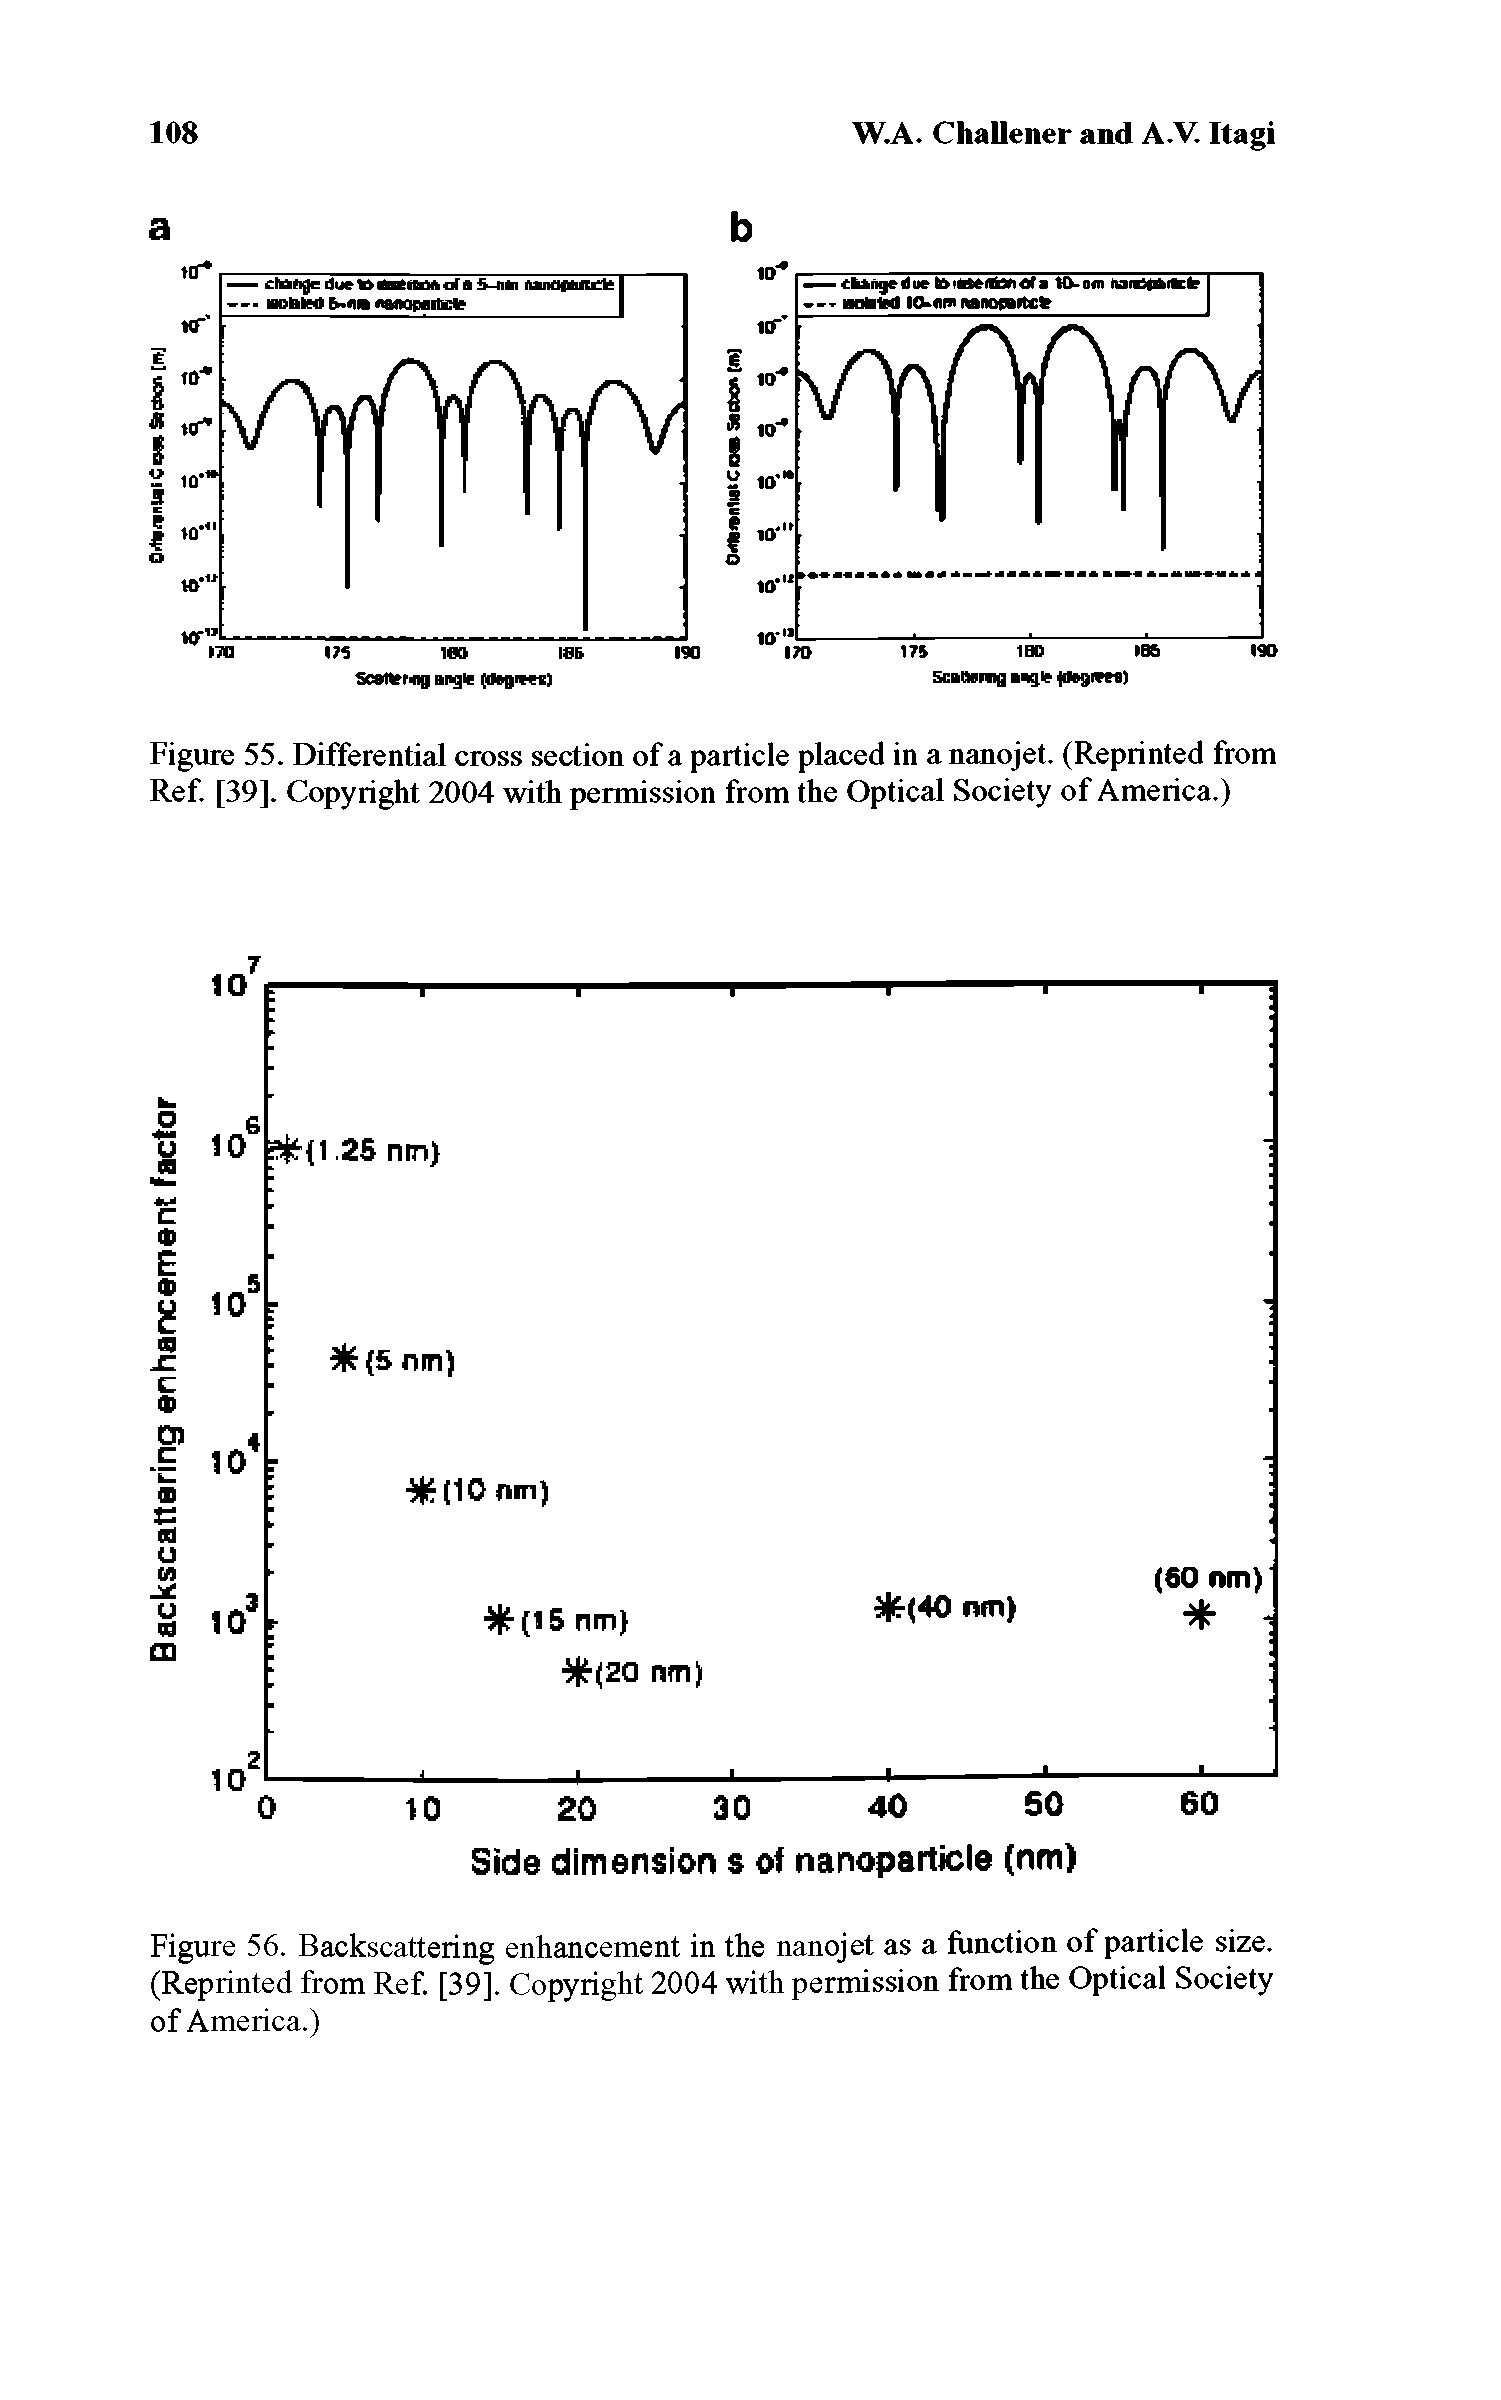 Figure 56. Backscattering enhancement in the nanojet as a function of particle size. (Reprinted from Ref. [39]. Copyright 2004 with permission from the Optical Society of America.)...